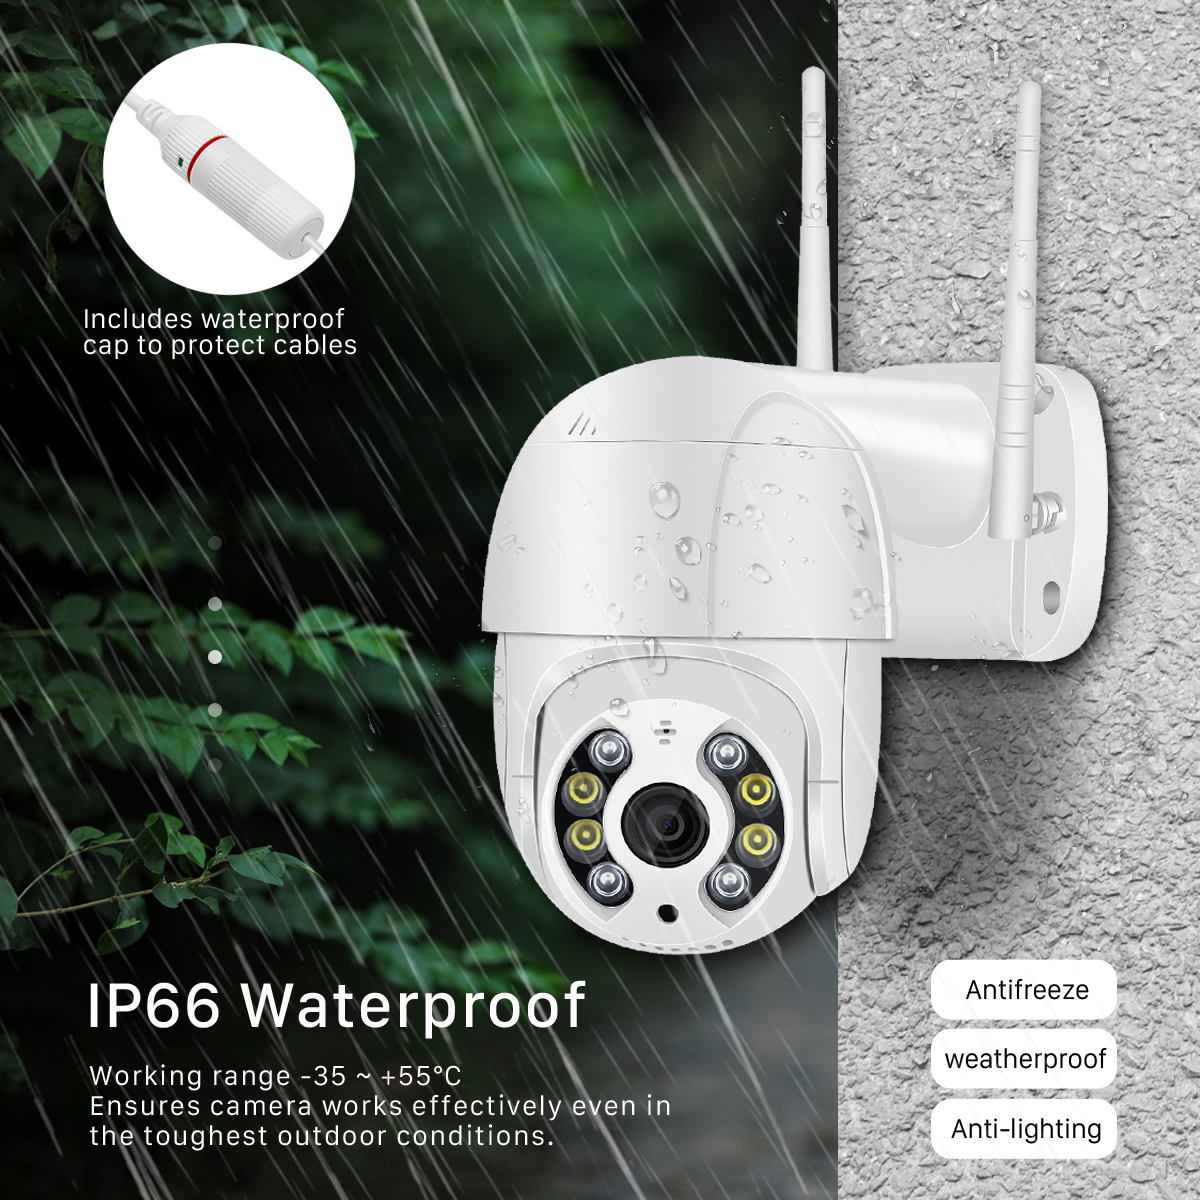 Detection Auto Tracking Waterproof WiFi IP Camera Two Way Audio Night Vision%20(9)